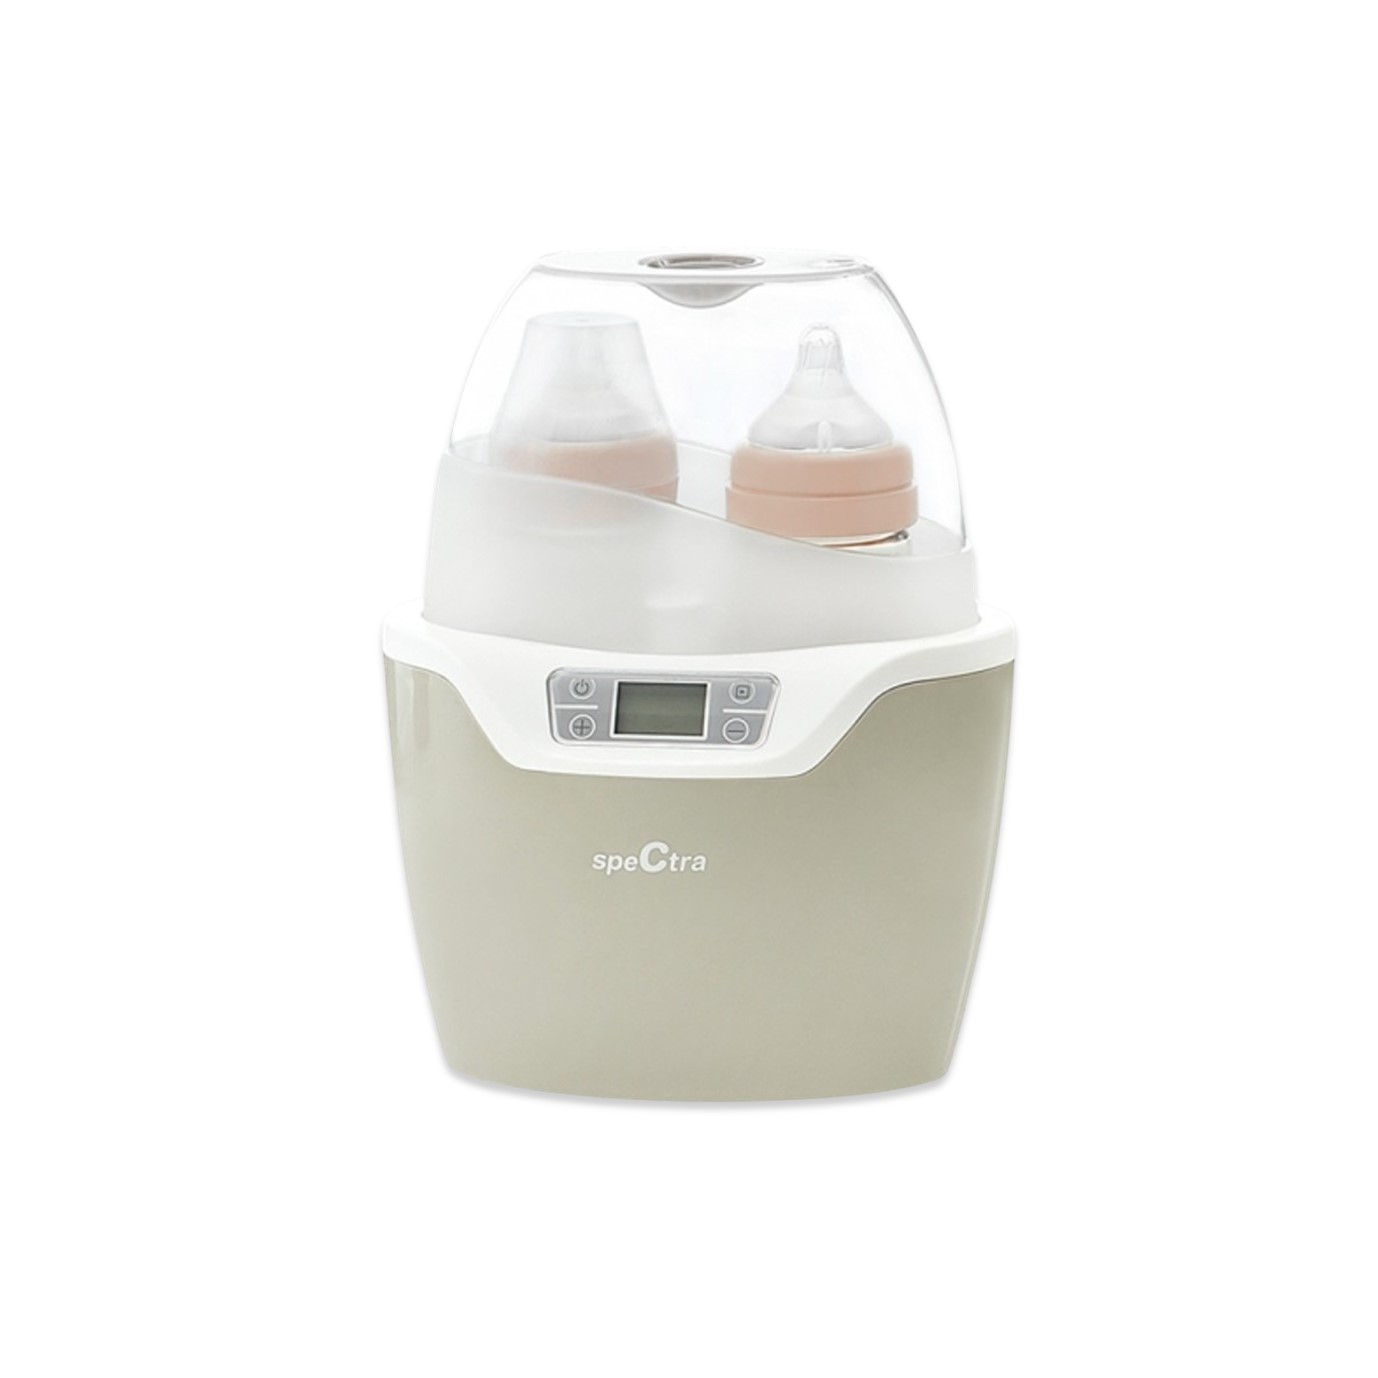 The Spectra Dual Compact Breast Pump – a game-changer for busy